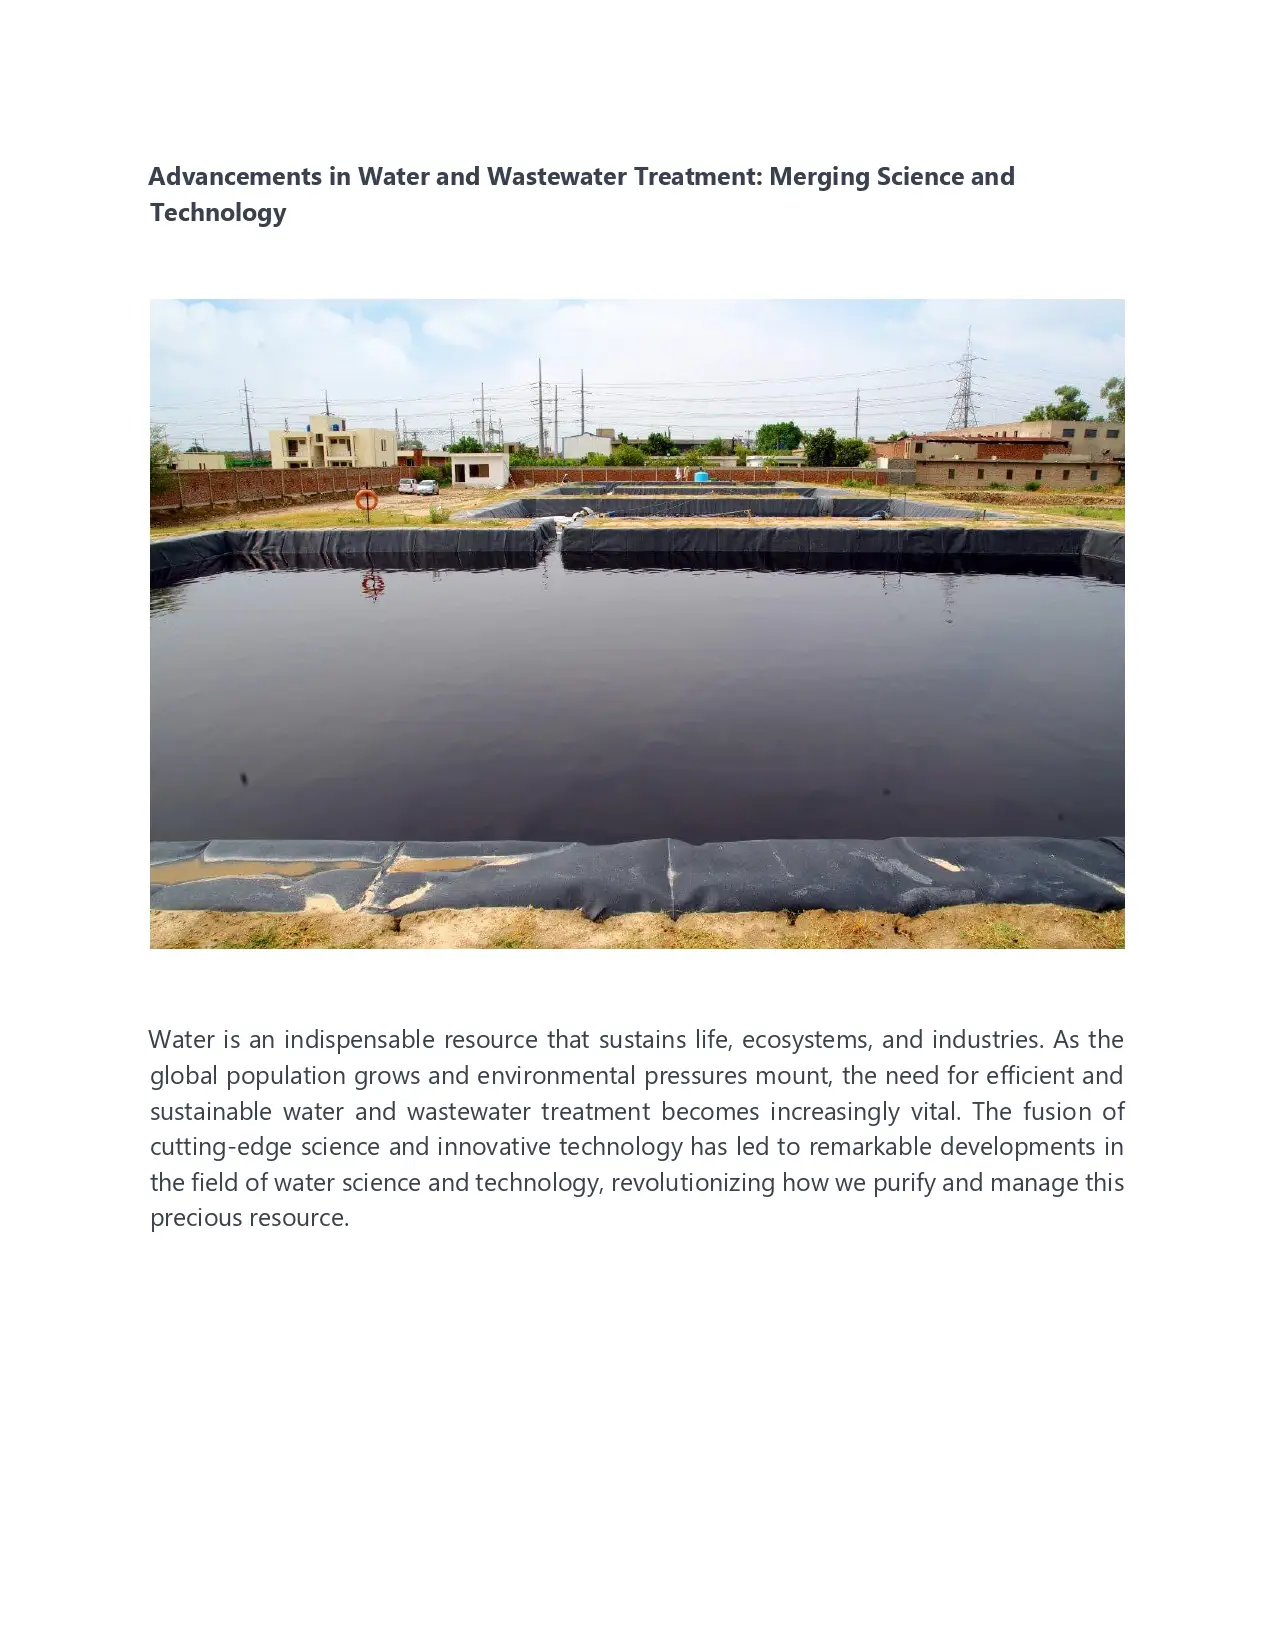 Advancements in Water and Wastewater Treatment: Merging Science and Technology